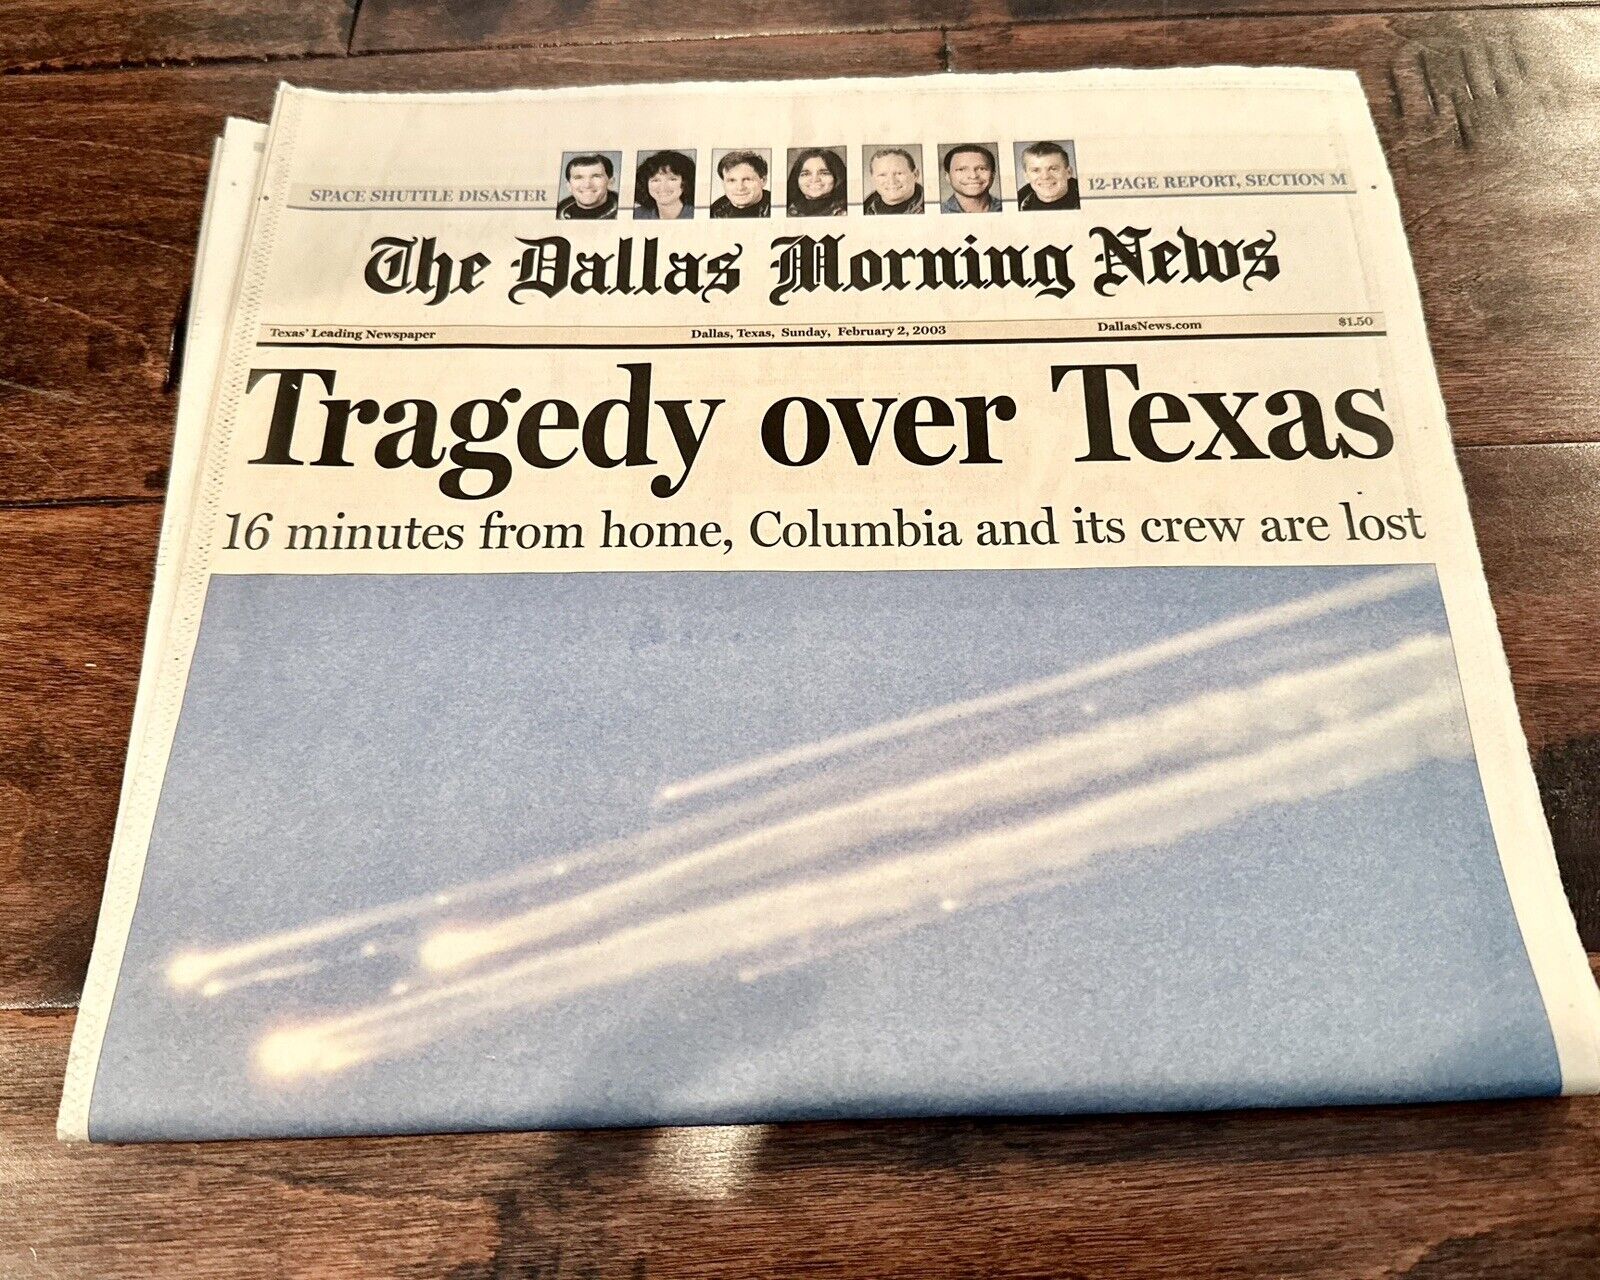 The Dallas Morning News - February 2nd 2003 - Columbia Space Shuttle Disaster 